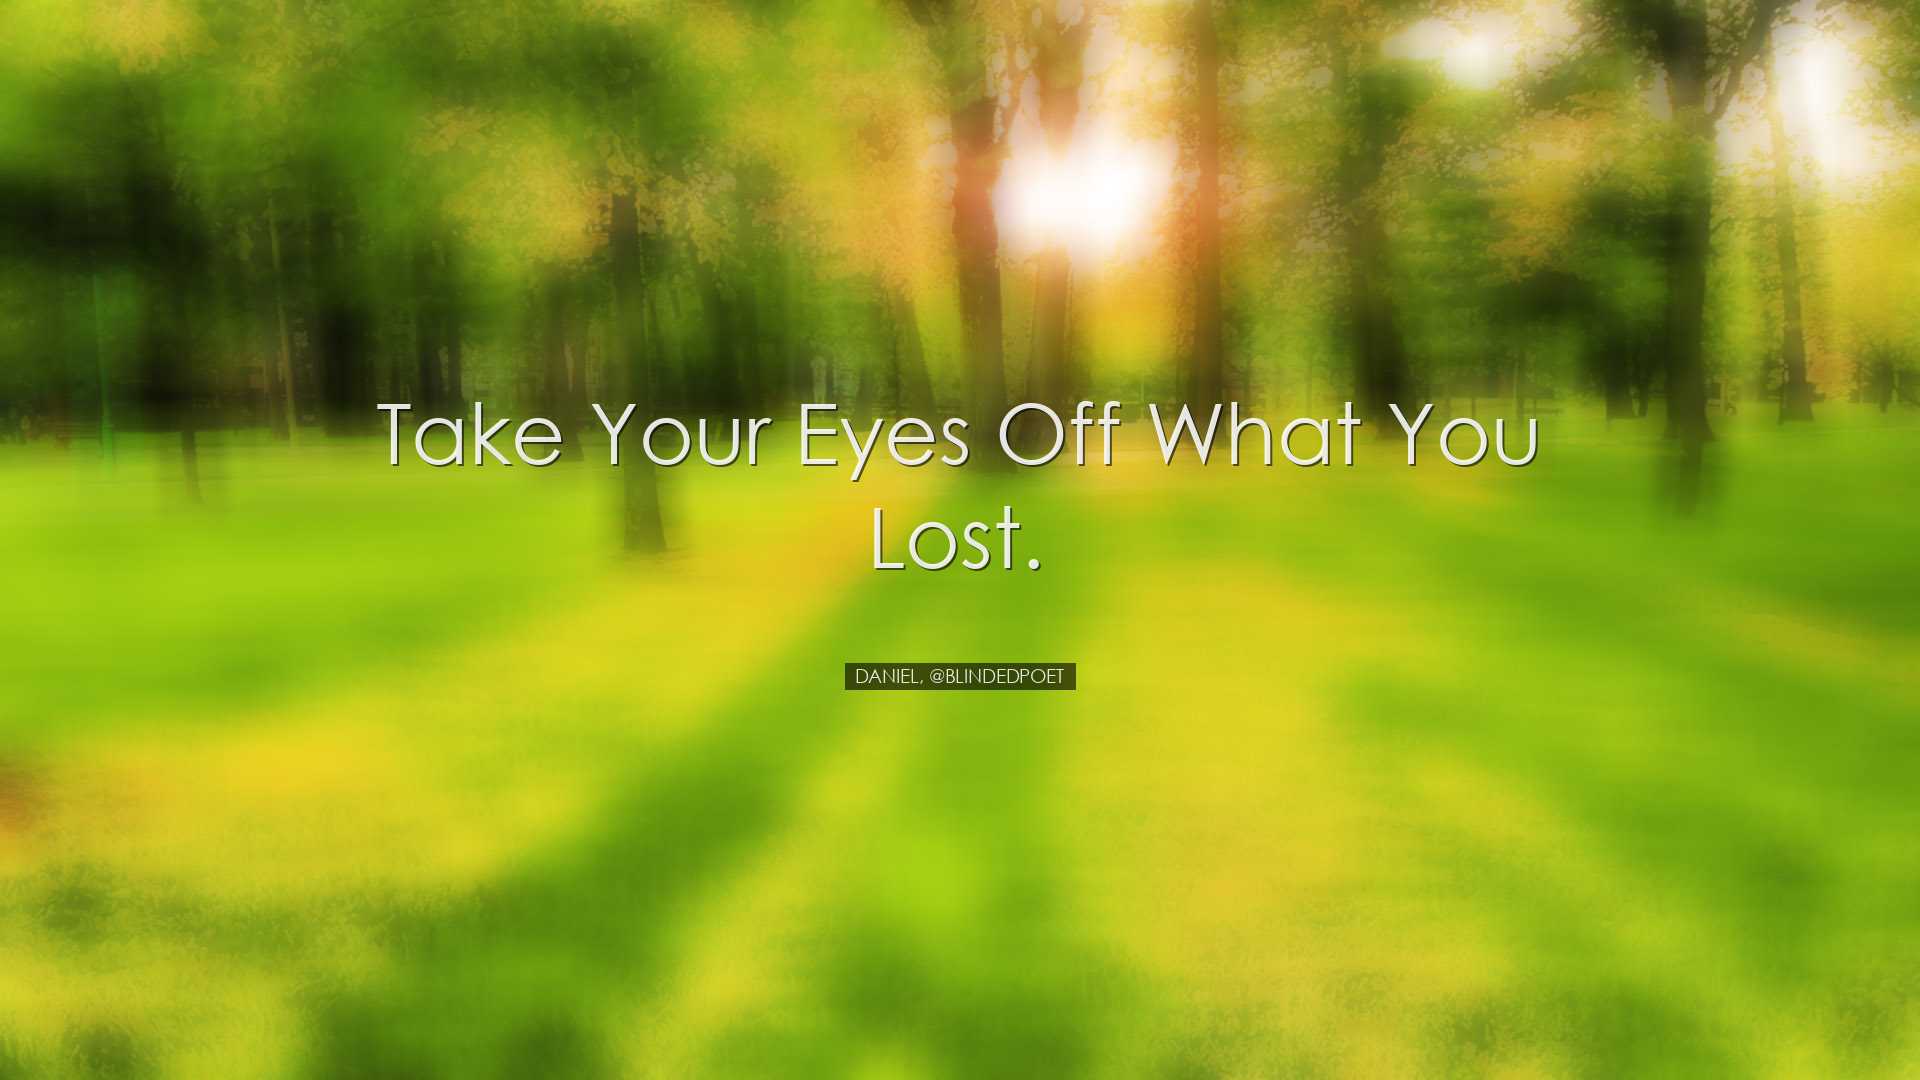 Take your eyes off what you lost. - Daniel, @blindedpoet